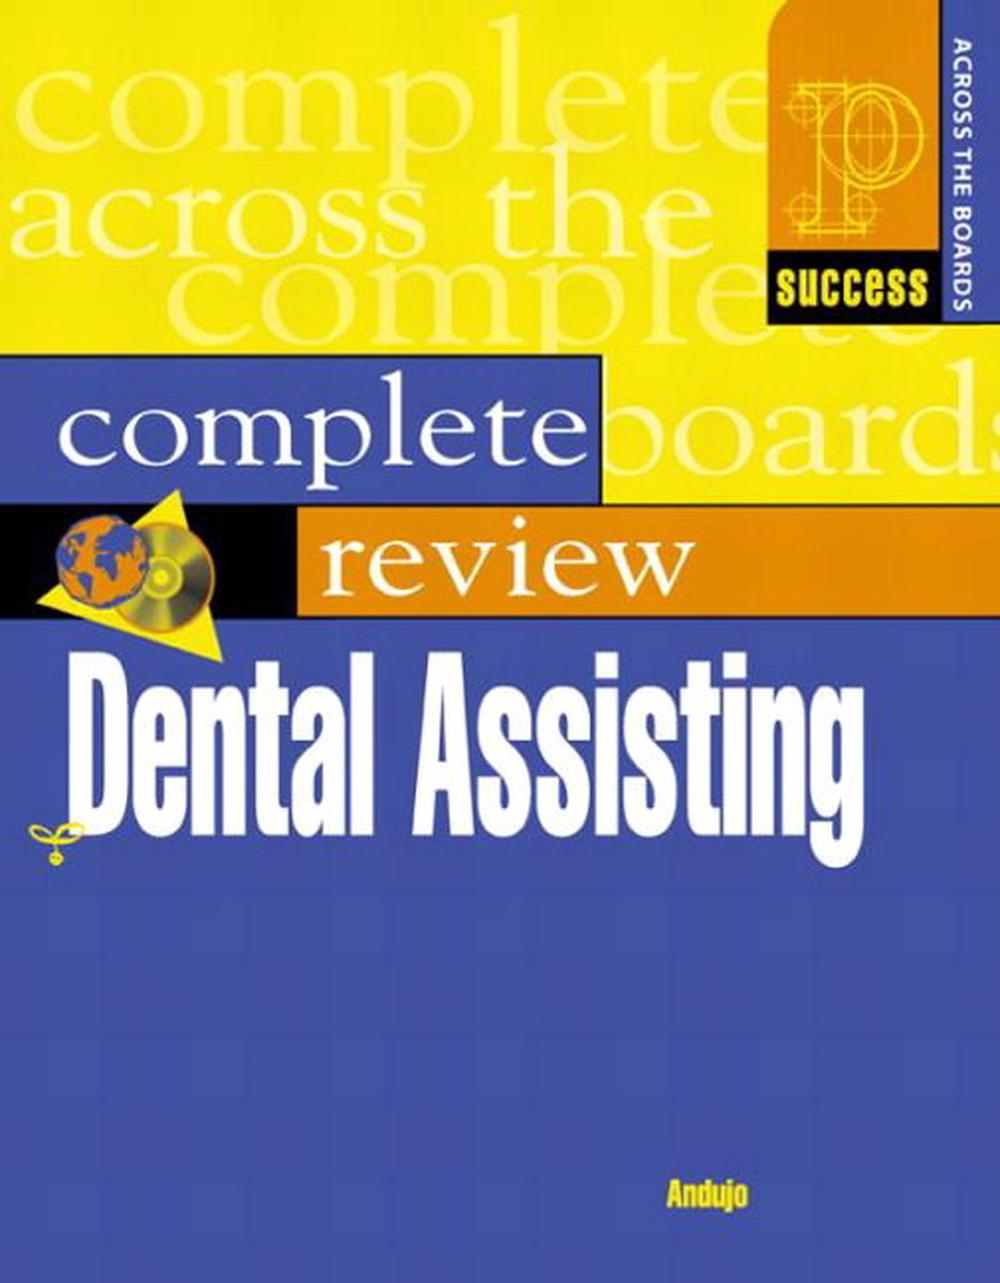 Prentice Hall Health's Complete Review of Dental Assisting [With CDROM] by Emily Andujo